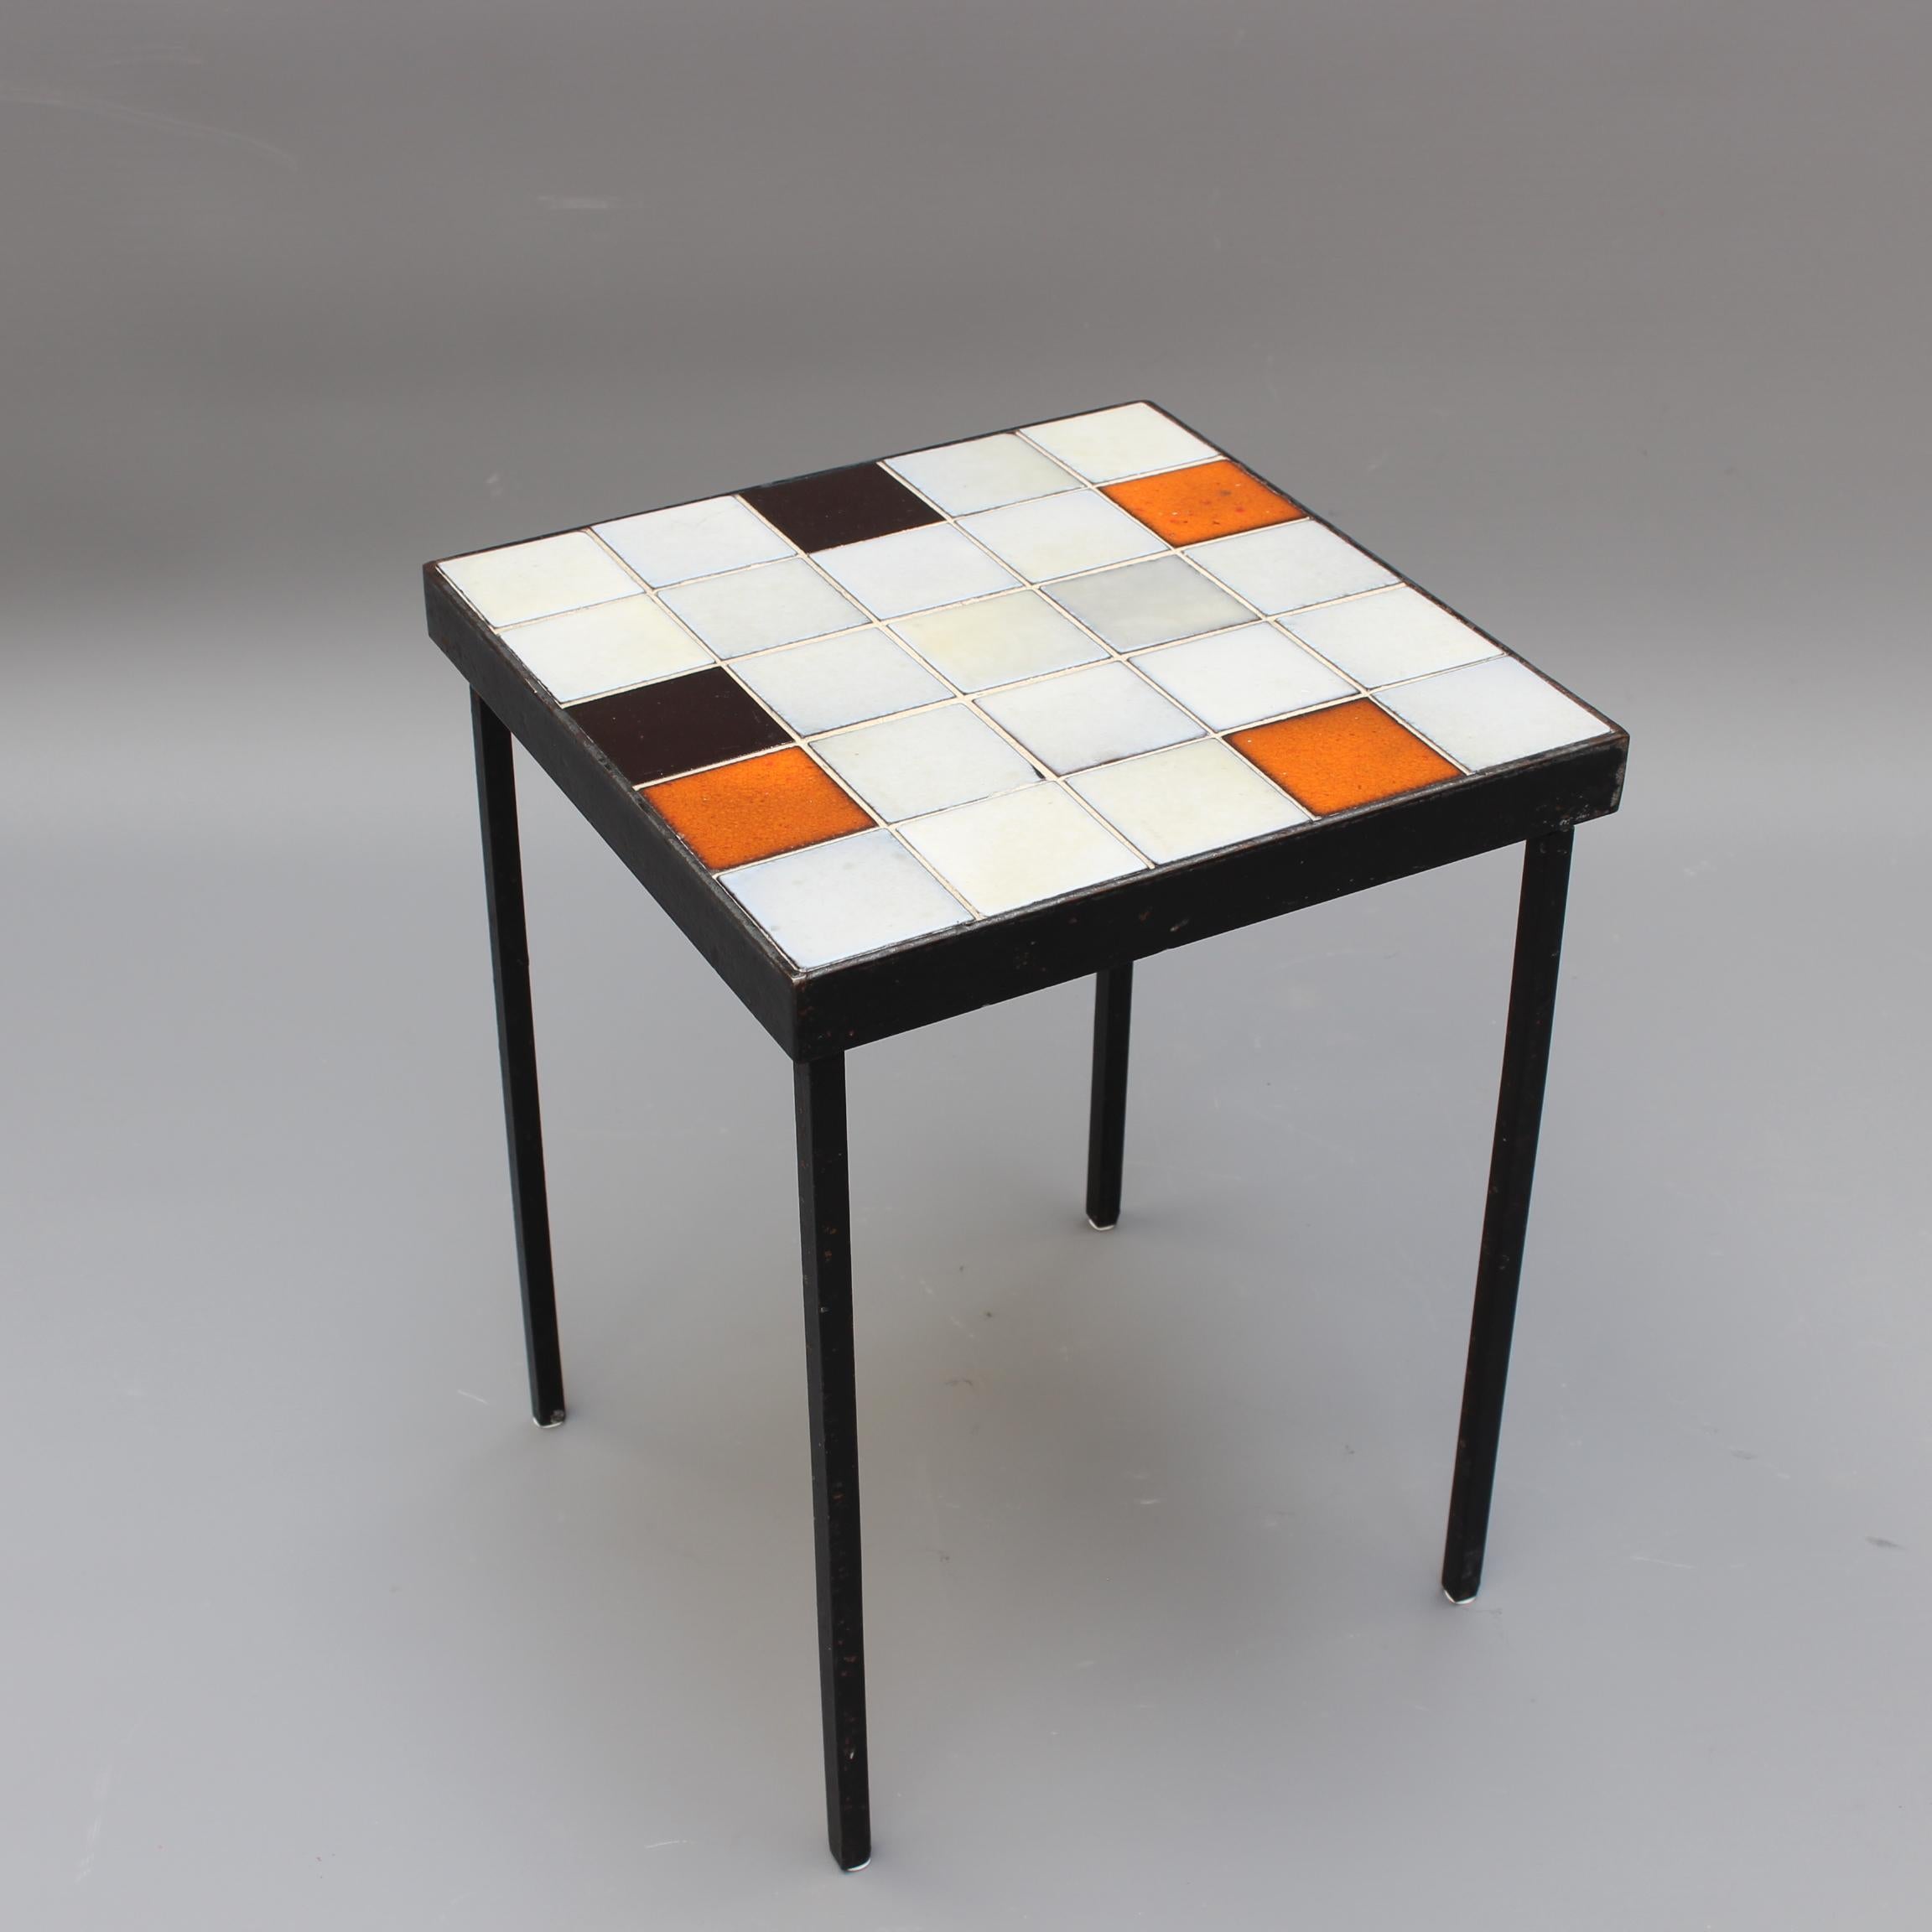 French Midcentury Ceramic Tiled Side Table by Mado Jolain 'circa 1950s'